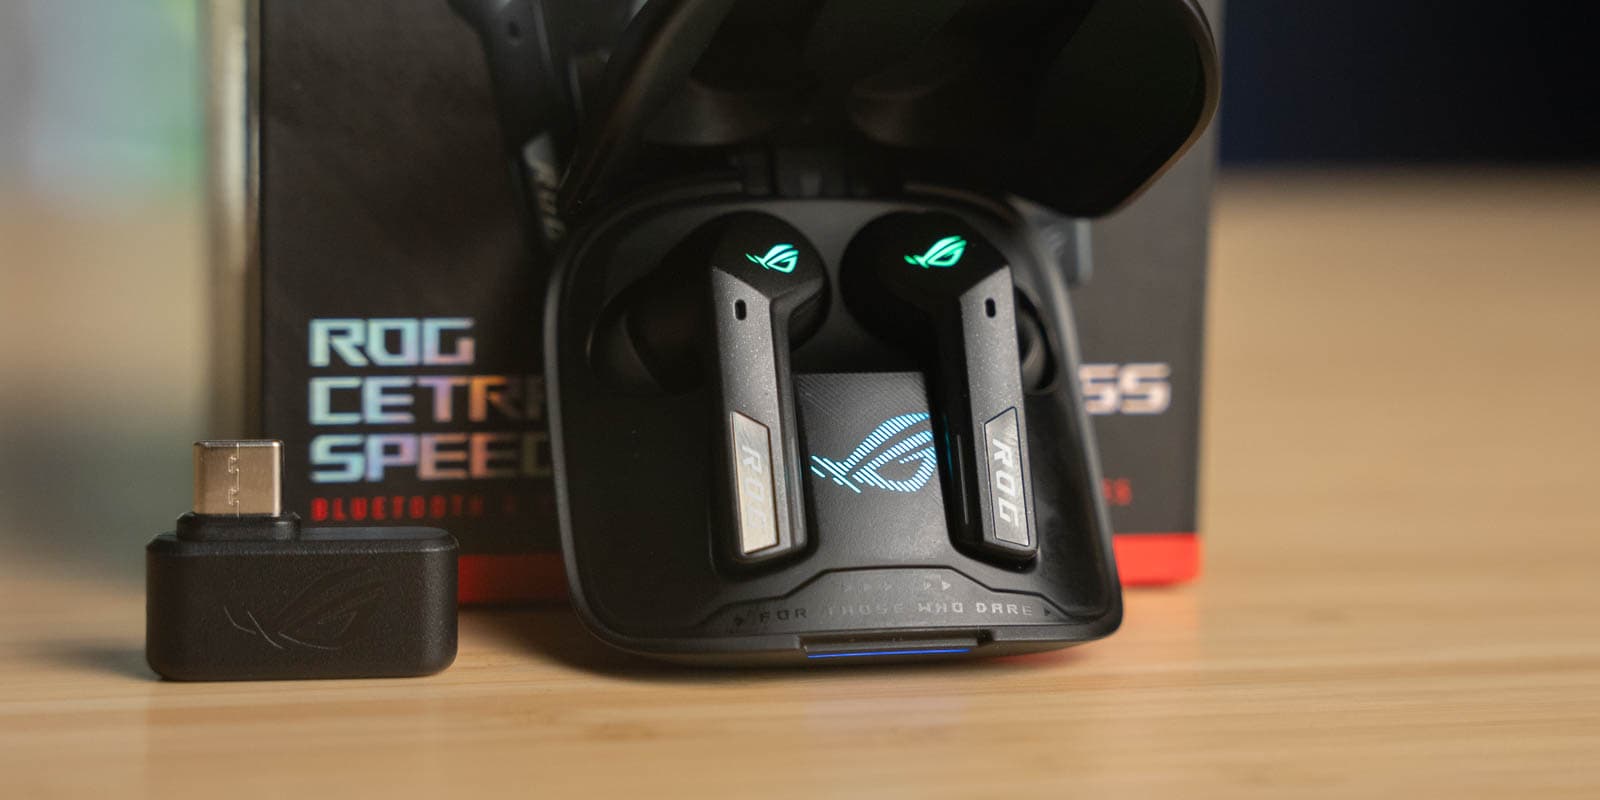 ROG Cetra SpeedNova: Are TWS earbuds good for gaming?